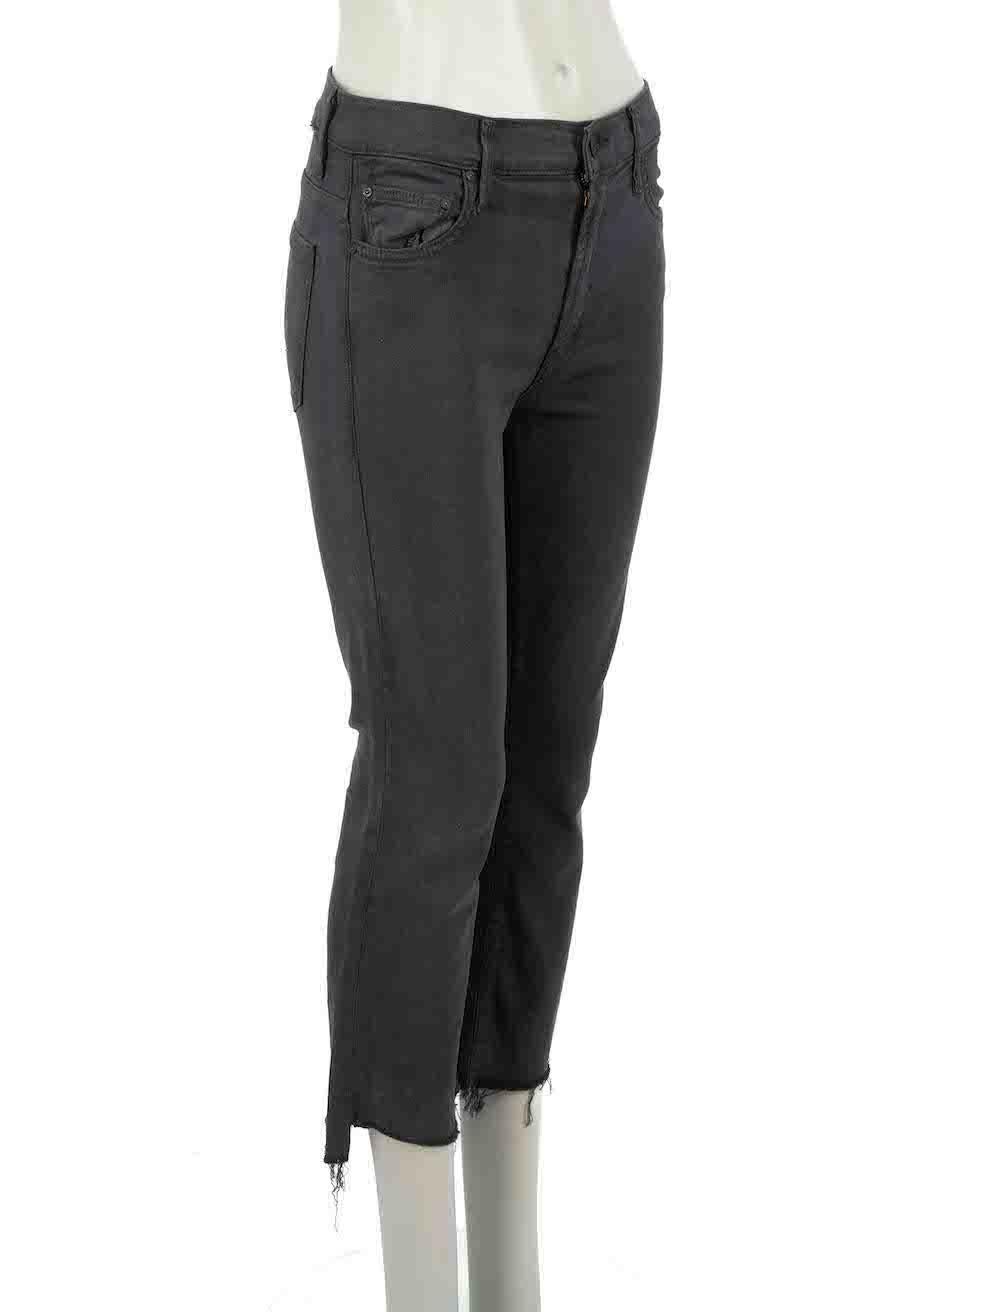 CONDITION is Very good. Hardly any visible wear to jeans is evident on this used Mother designer resale item.
 
 Details:
 Faded black
 Cotton
 Jeans
 Flared
 Cropped
 High rise
 3x Front pockets
 2x Back pockets
 Fly zip and button fastening

